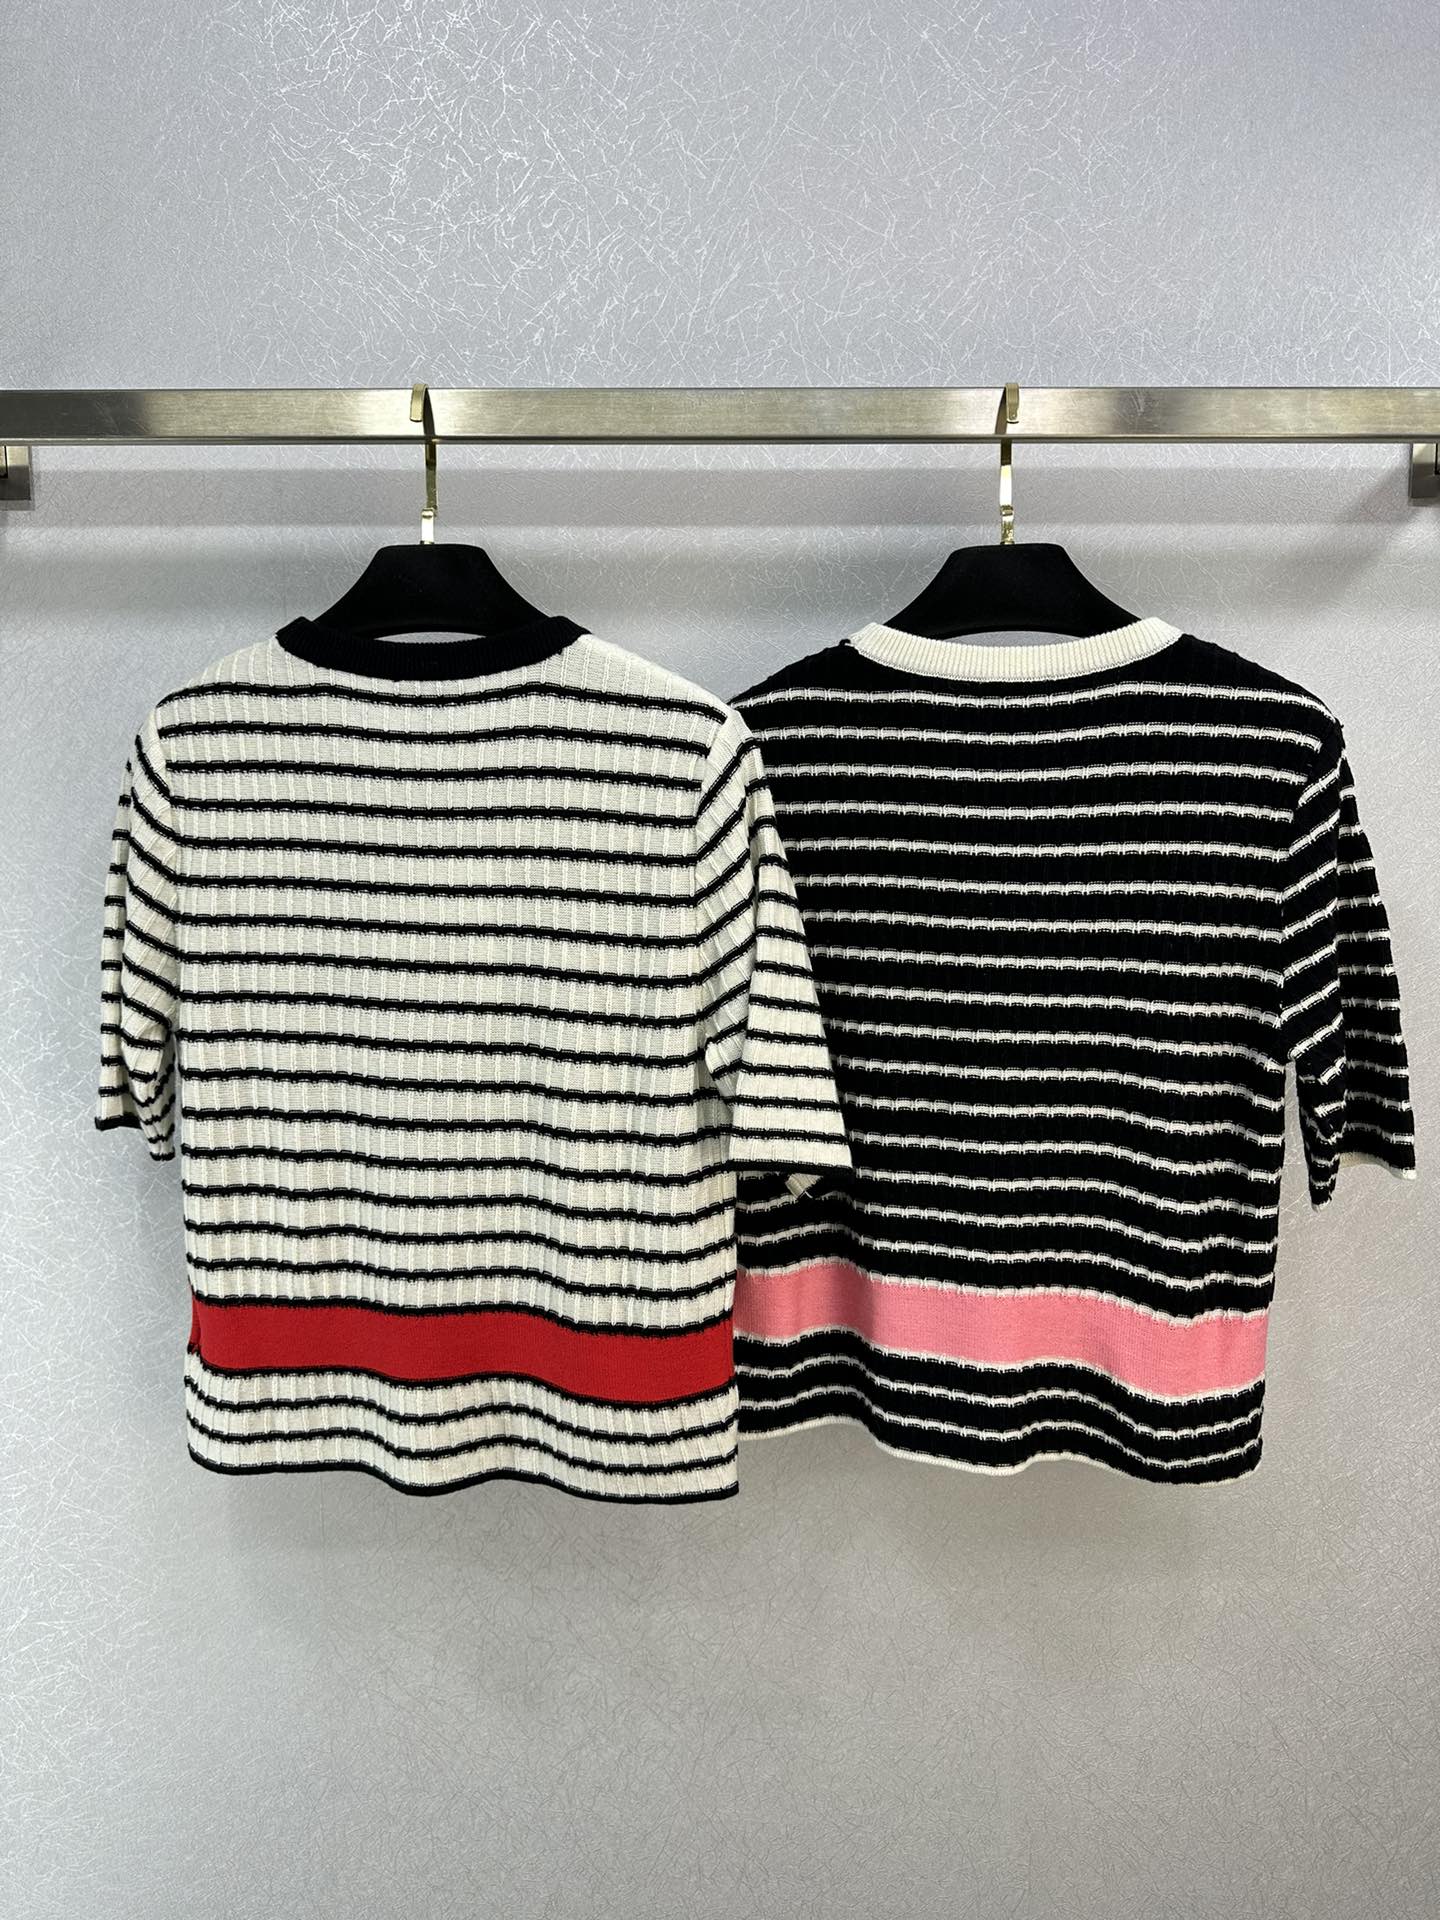 11001 2024 Runway Summer Brand Same Style Sweater 3/4 Sleeve Crew Neck Fashion Clothes High Quality Womens weilanG708